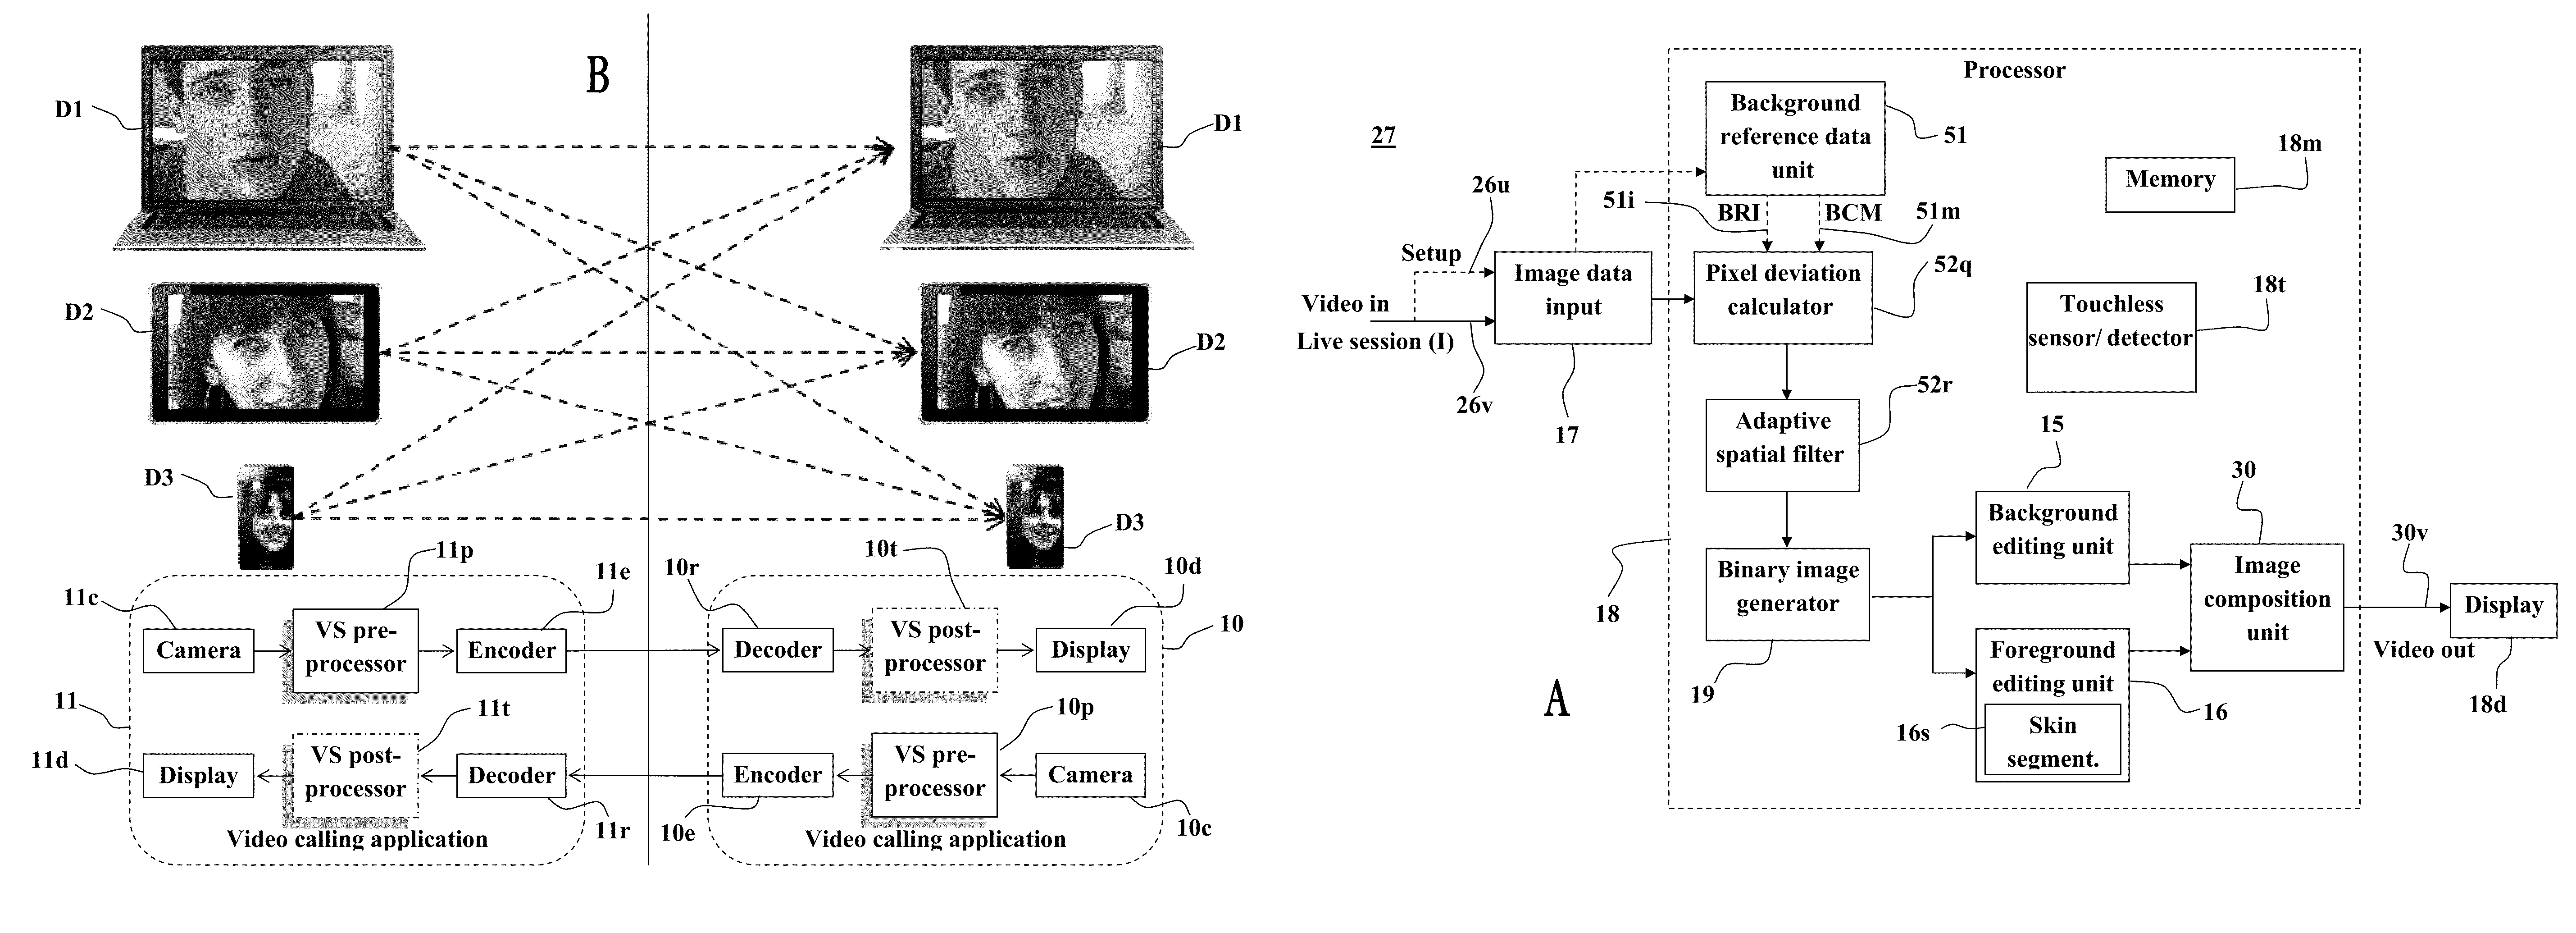 System and method for online processing of video images in real time